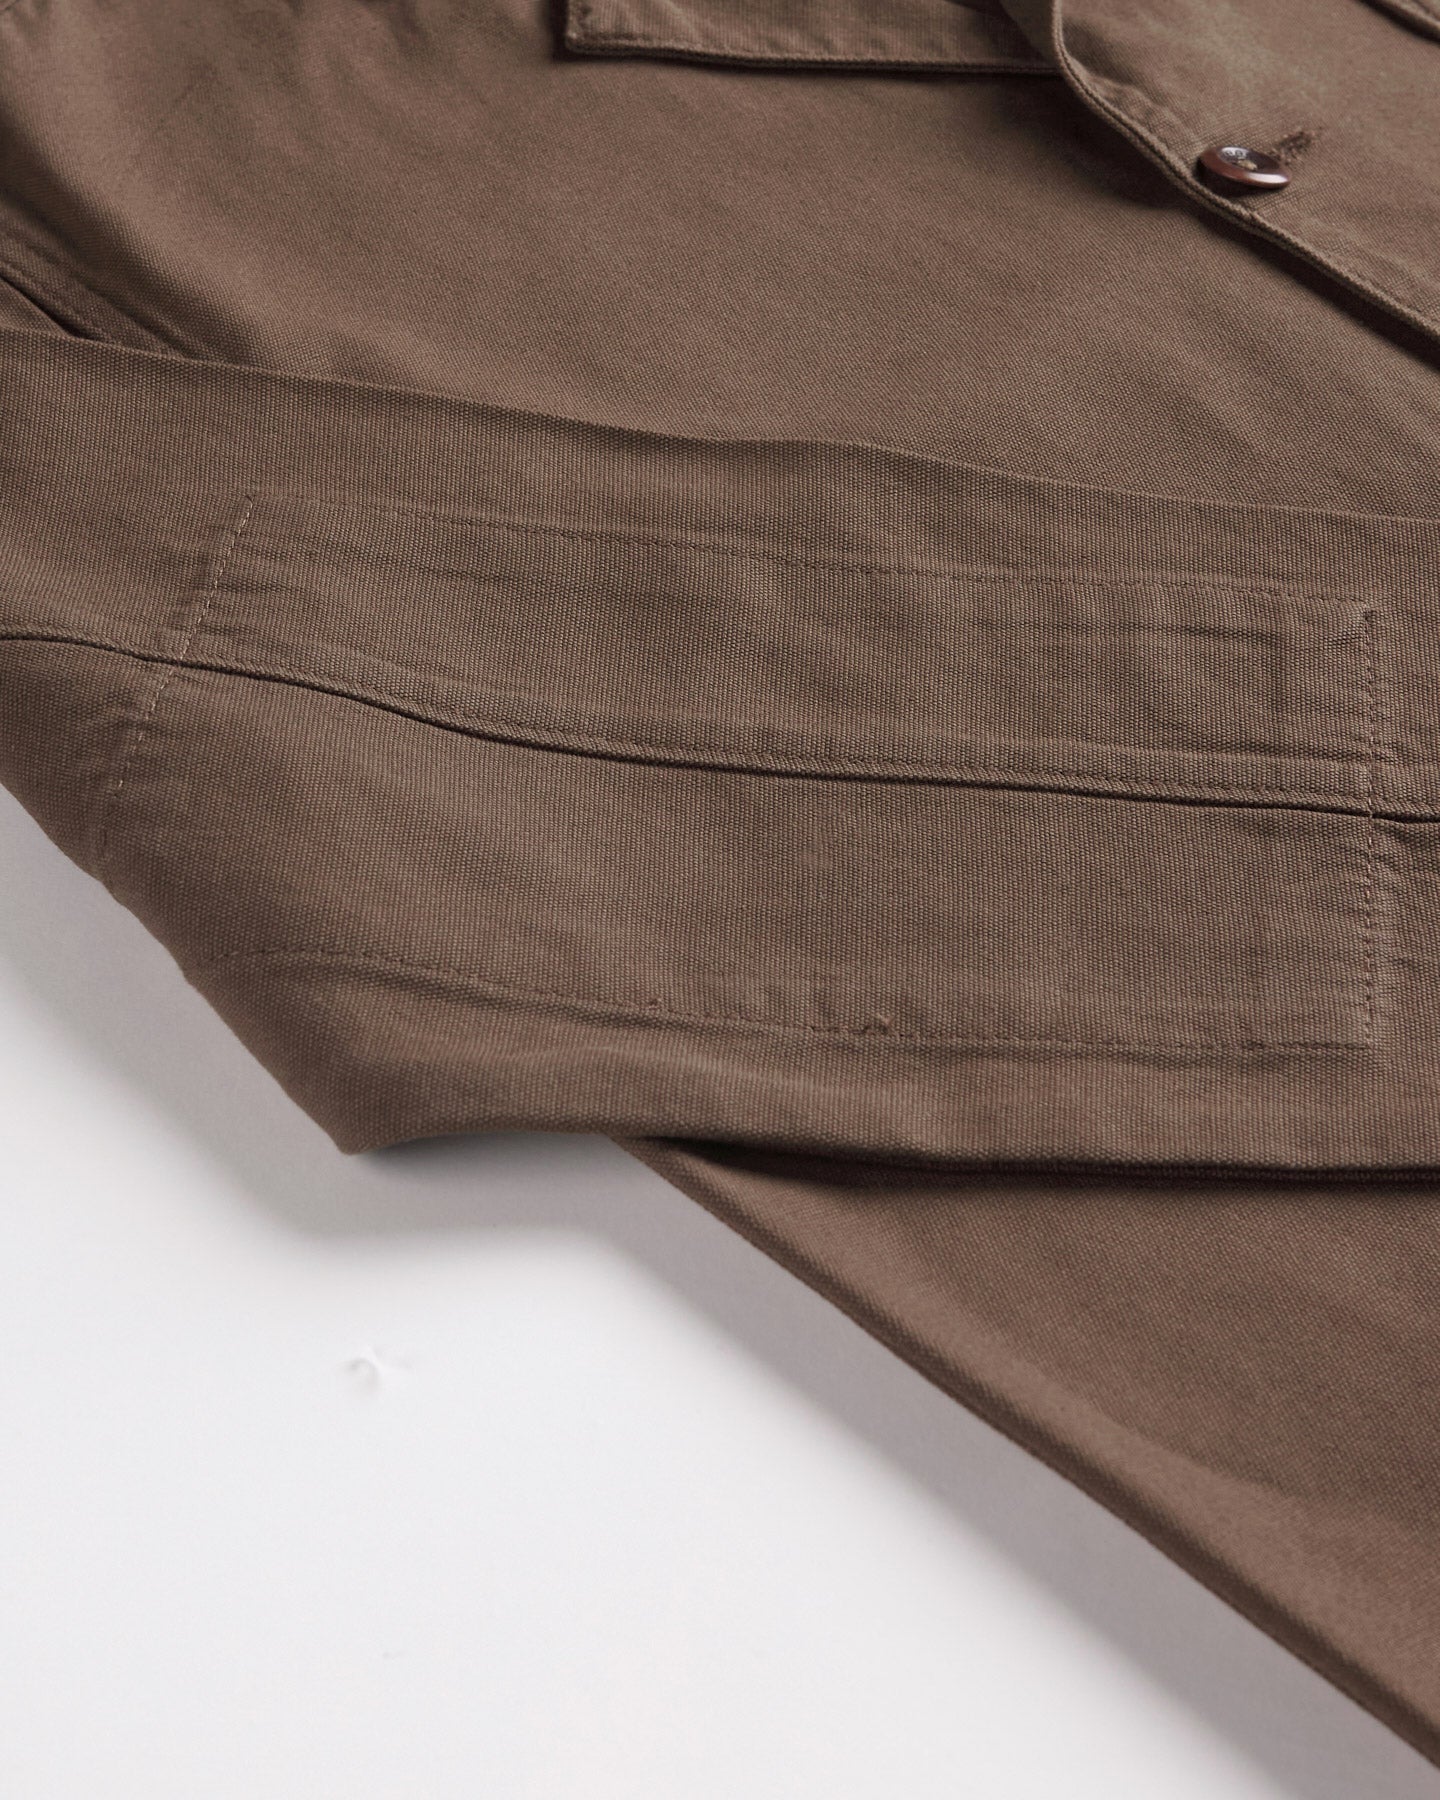 Focus on the reinforced elbow of cotton #3006 Uskees blazer in chocolate-brown. 